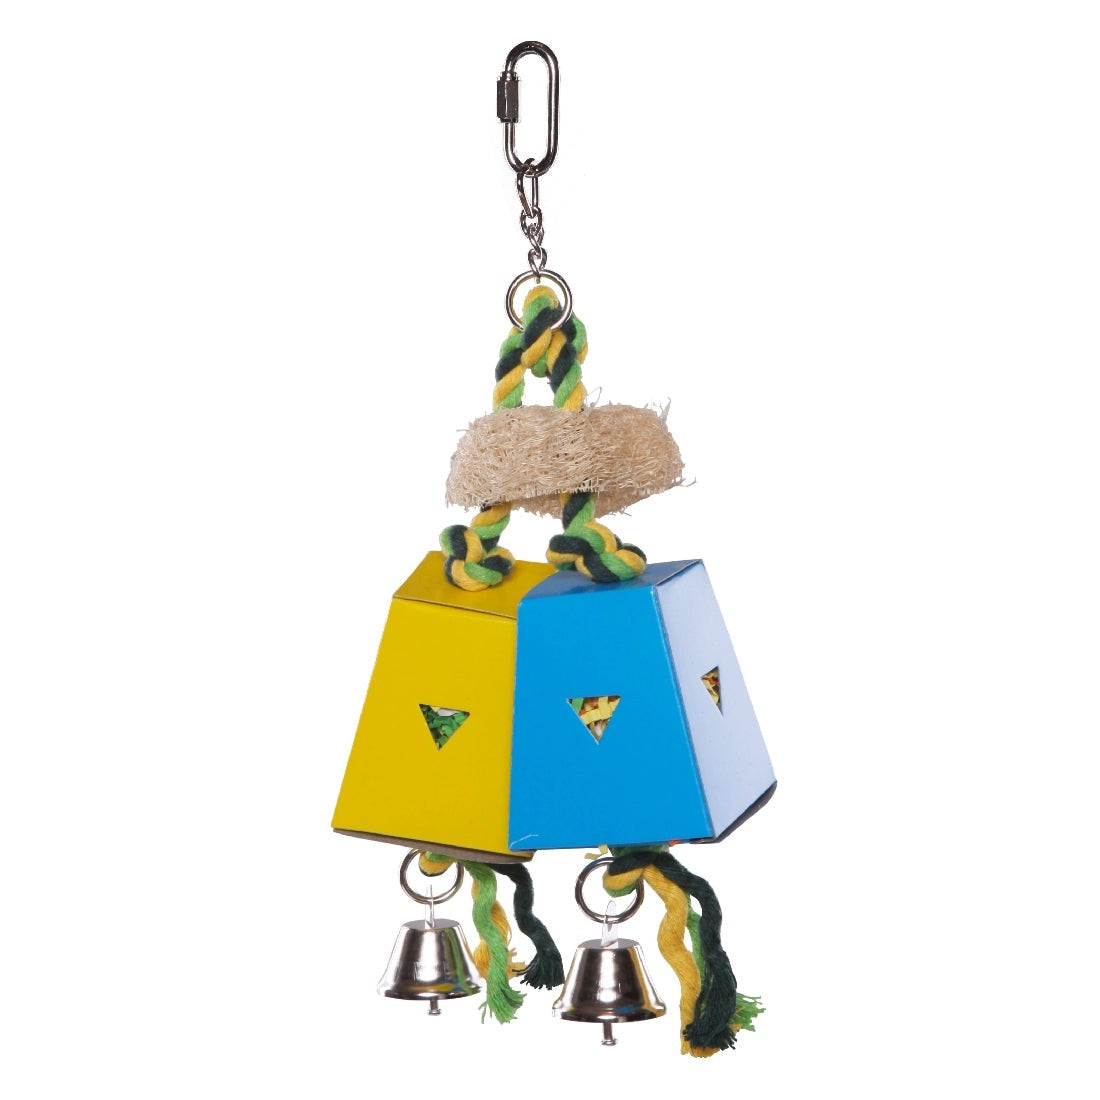 Colorful bird toy with bells, rope, and chewable parts, isolated.